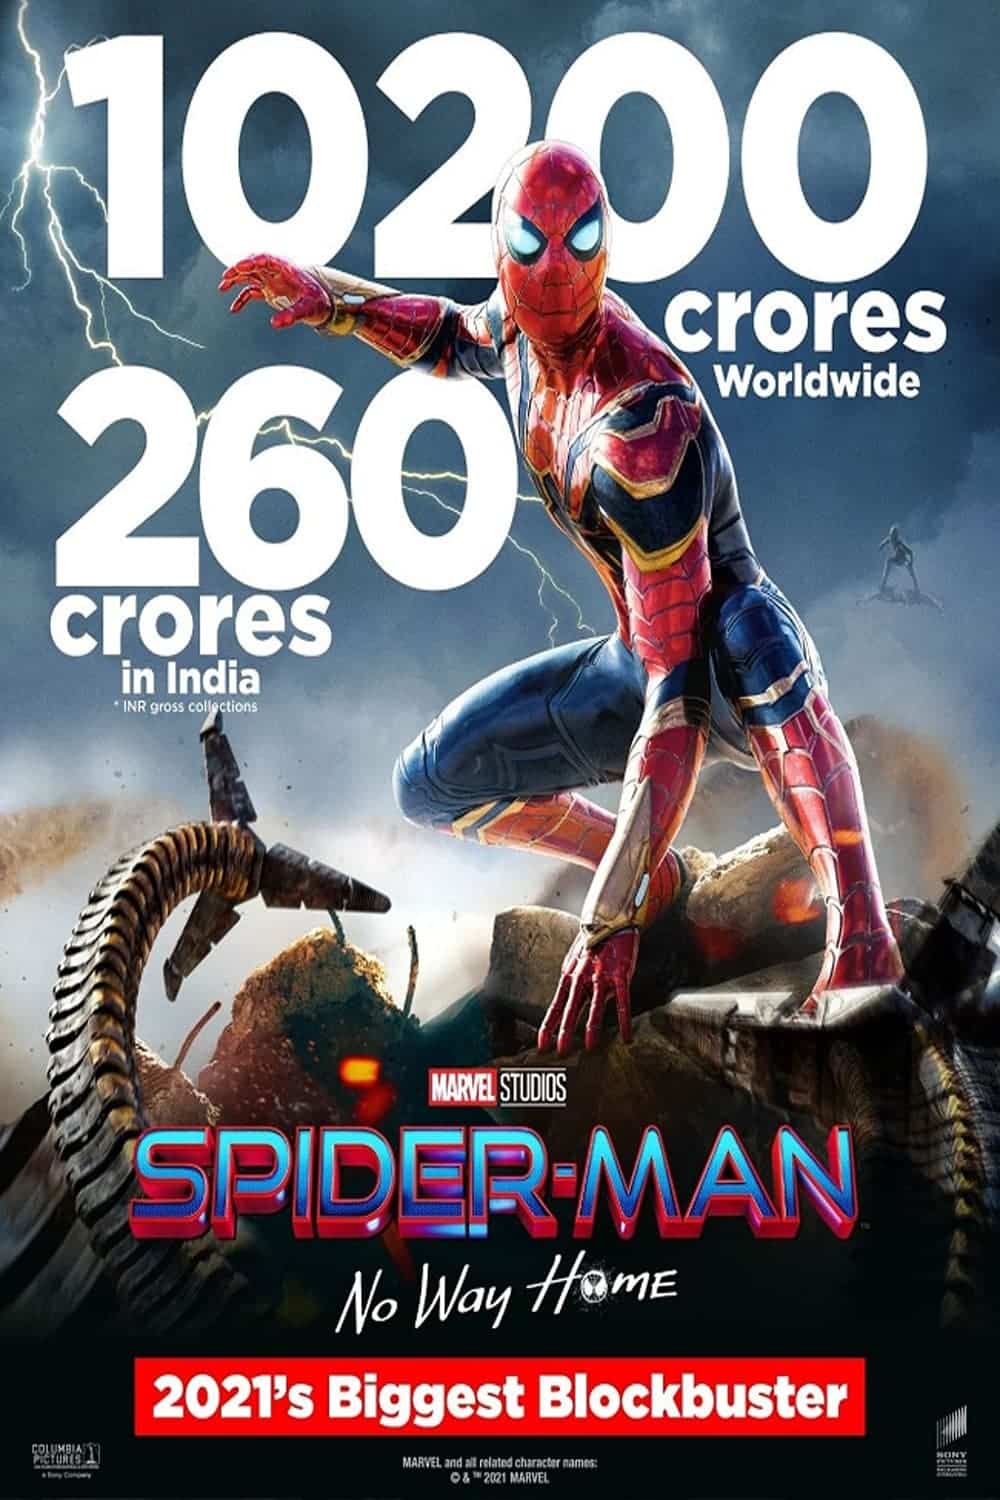 SPIDER-MAN NO WAY HOME BOX OFFICE COLLECTION 